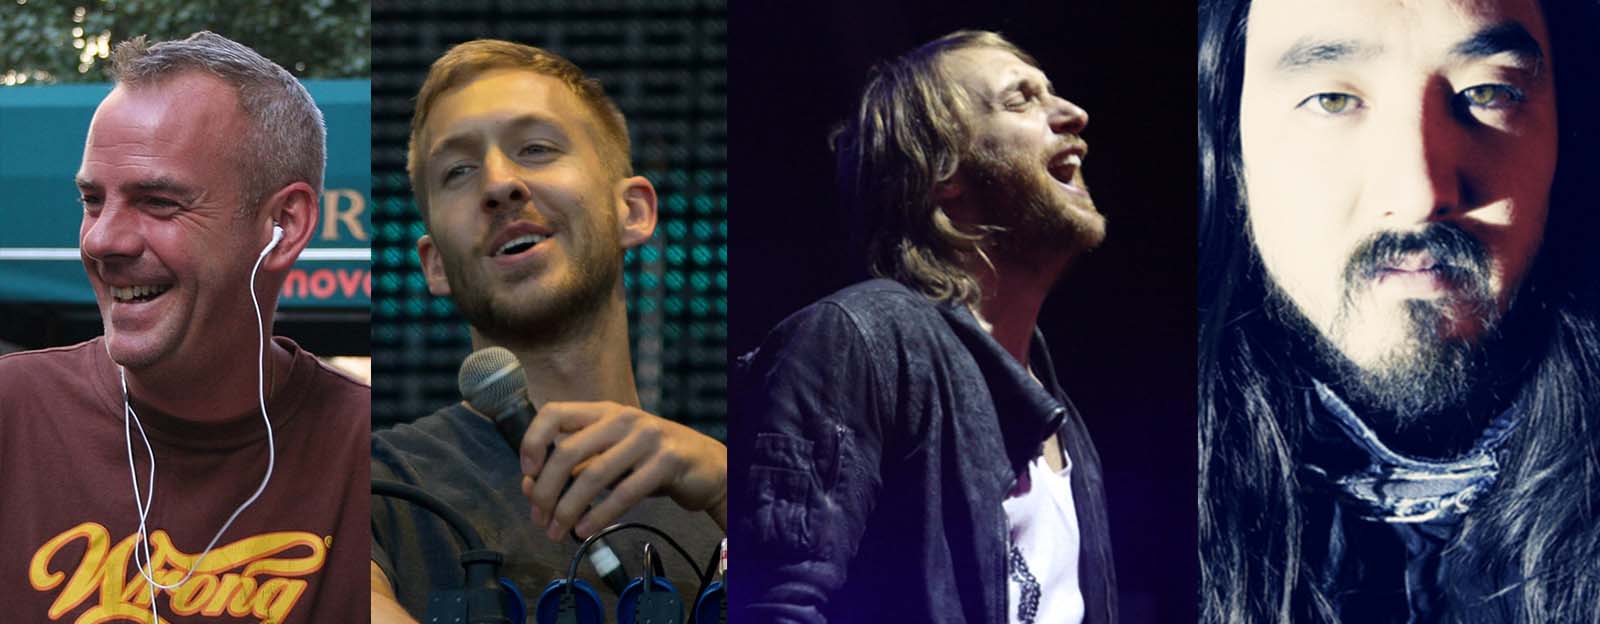 Calvin harris, david guetta, steve aoki & fatboy slim are amongst 40 of the worlds biggest djs coming together to perform at the qatar world cup